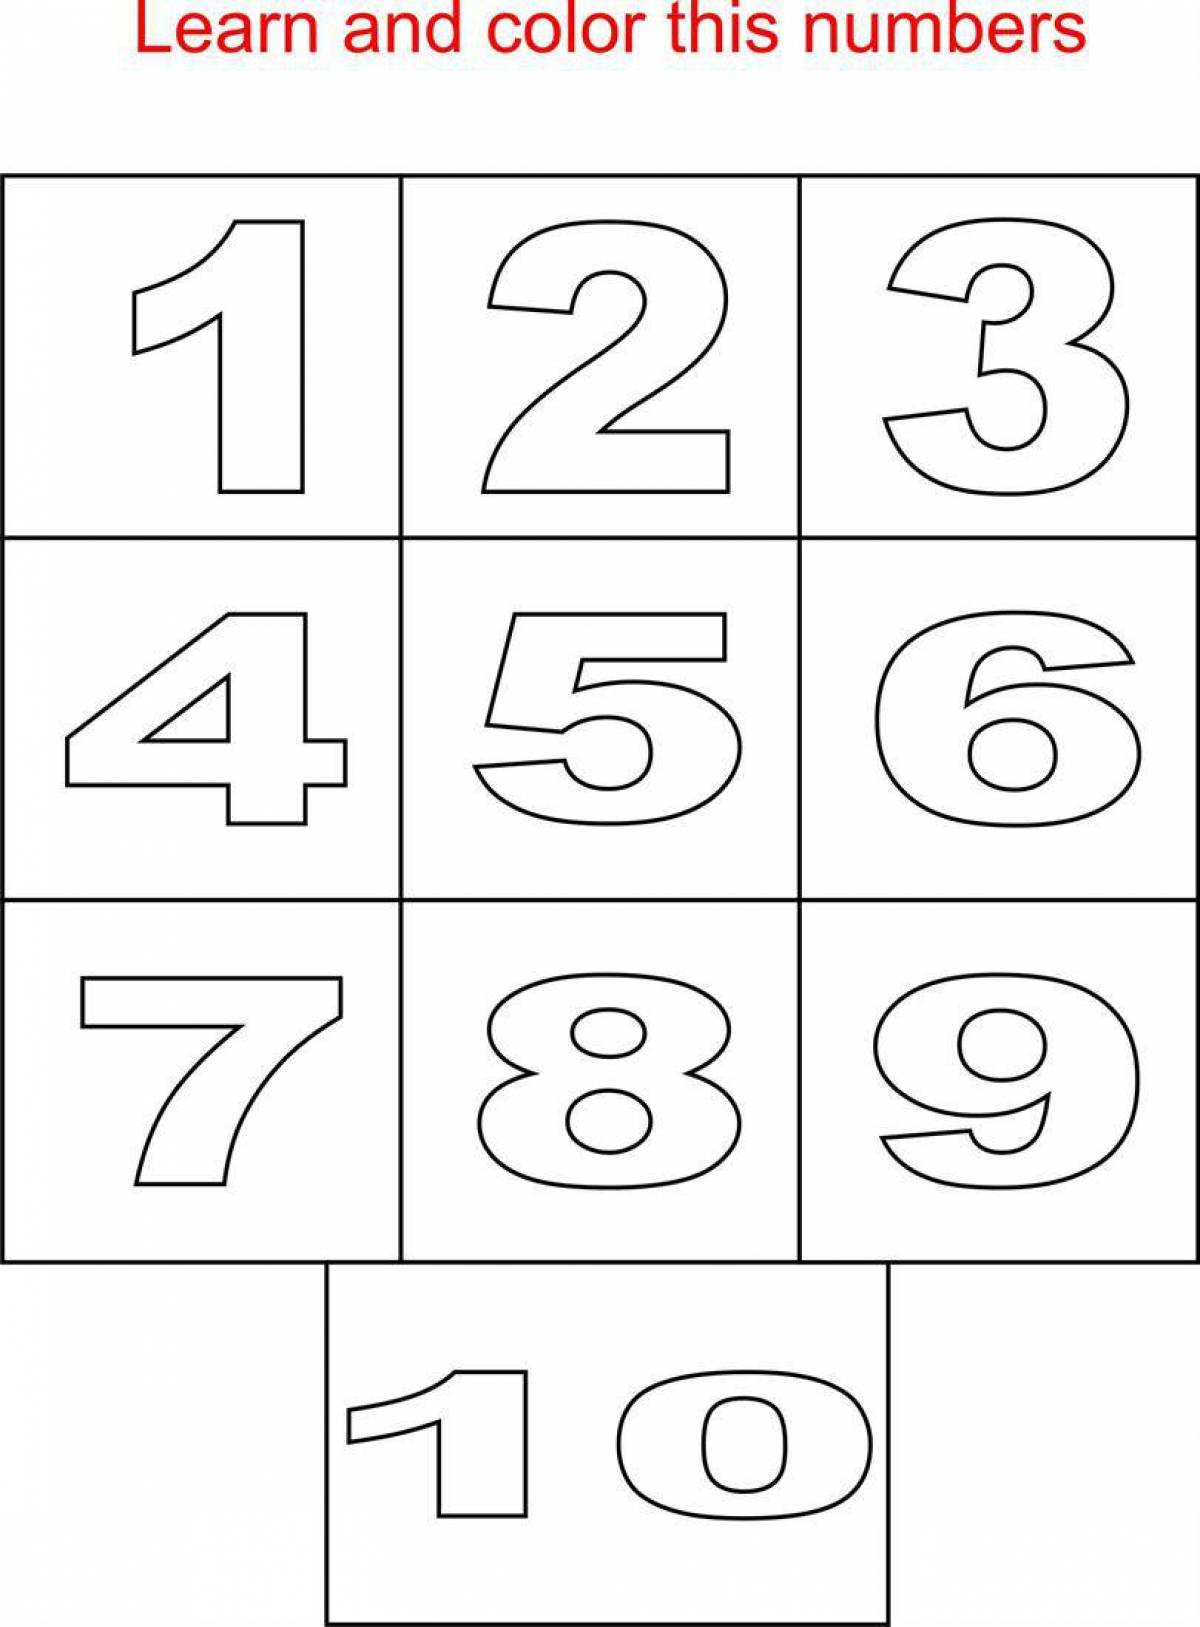 Attractive coloring pages with page numbers from 1 to 10